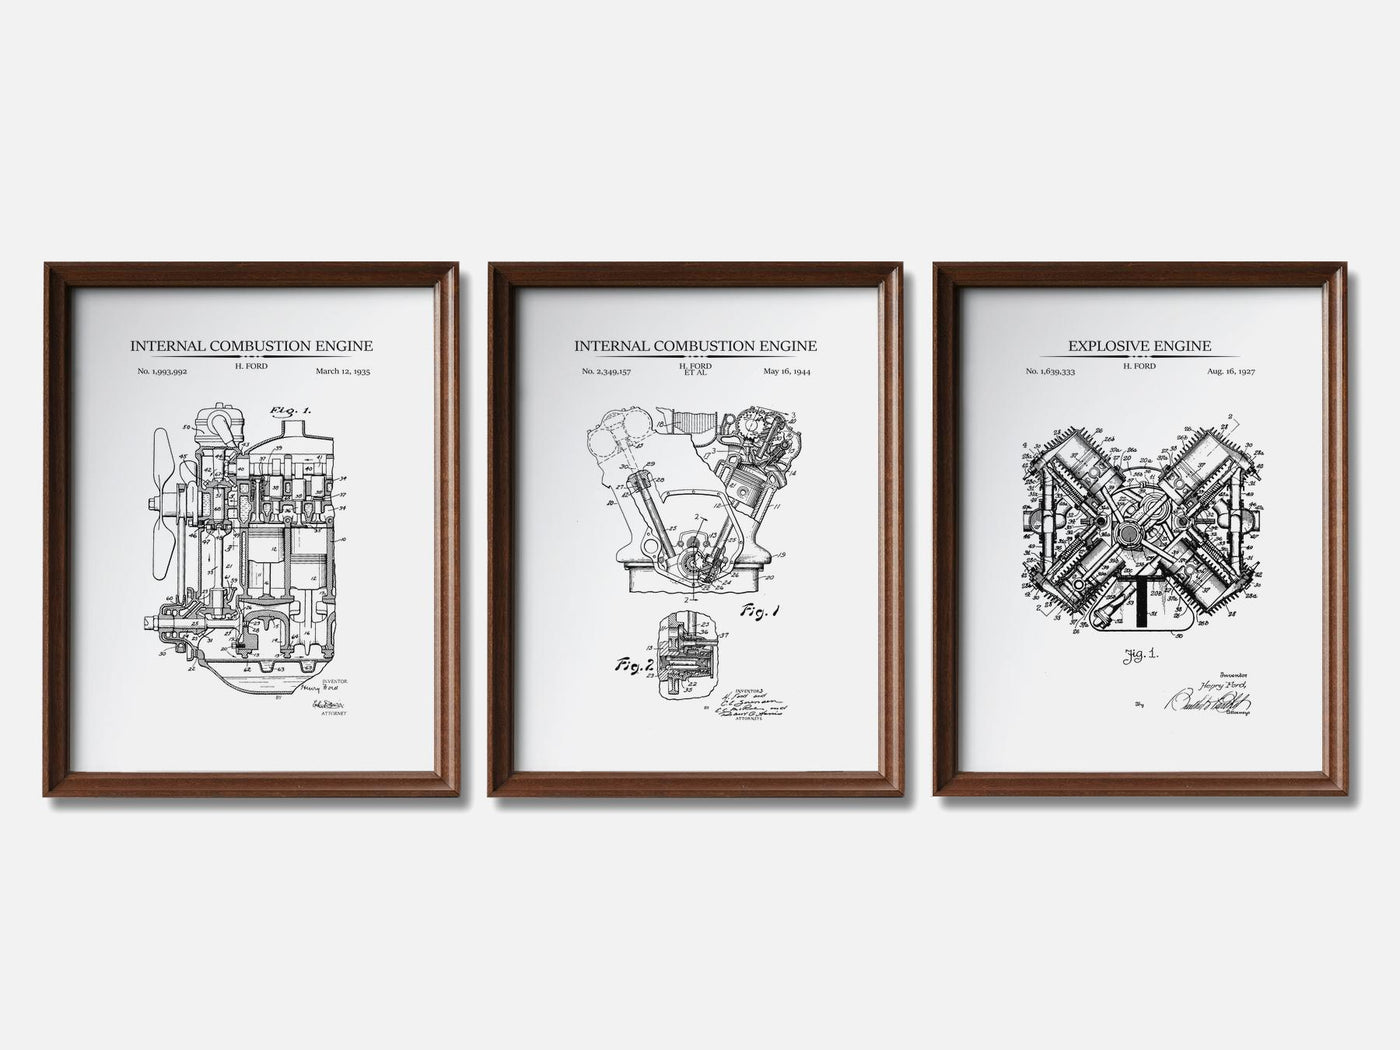 Henry Ford Patent Print Set of 3 mockup - A_t10072-V1-PC_F+WA-SS_3-PS_11x14-C_whi variant